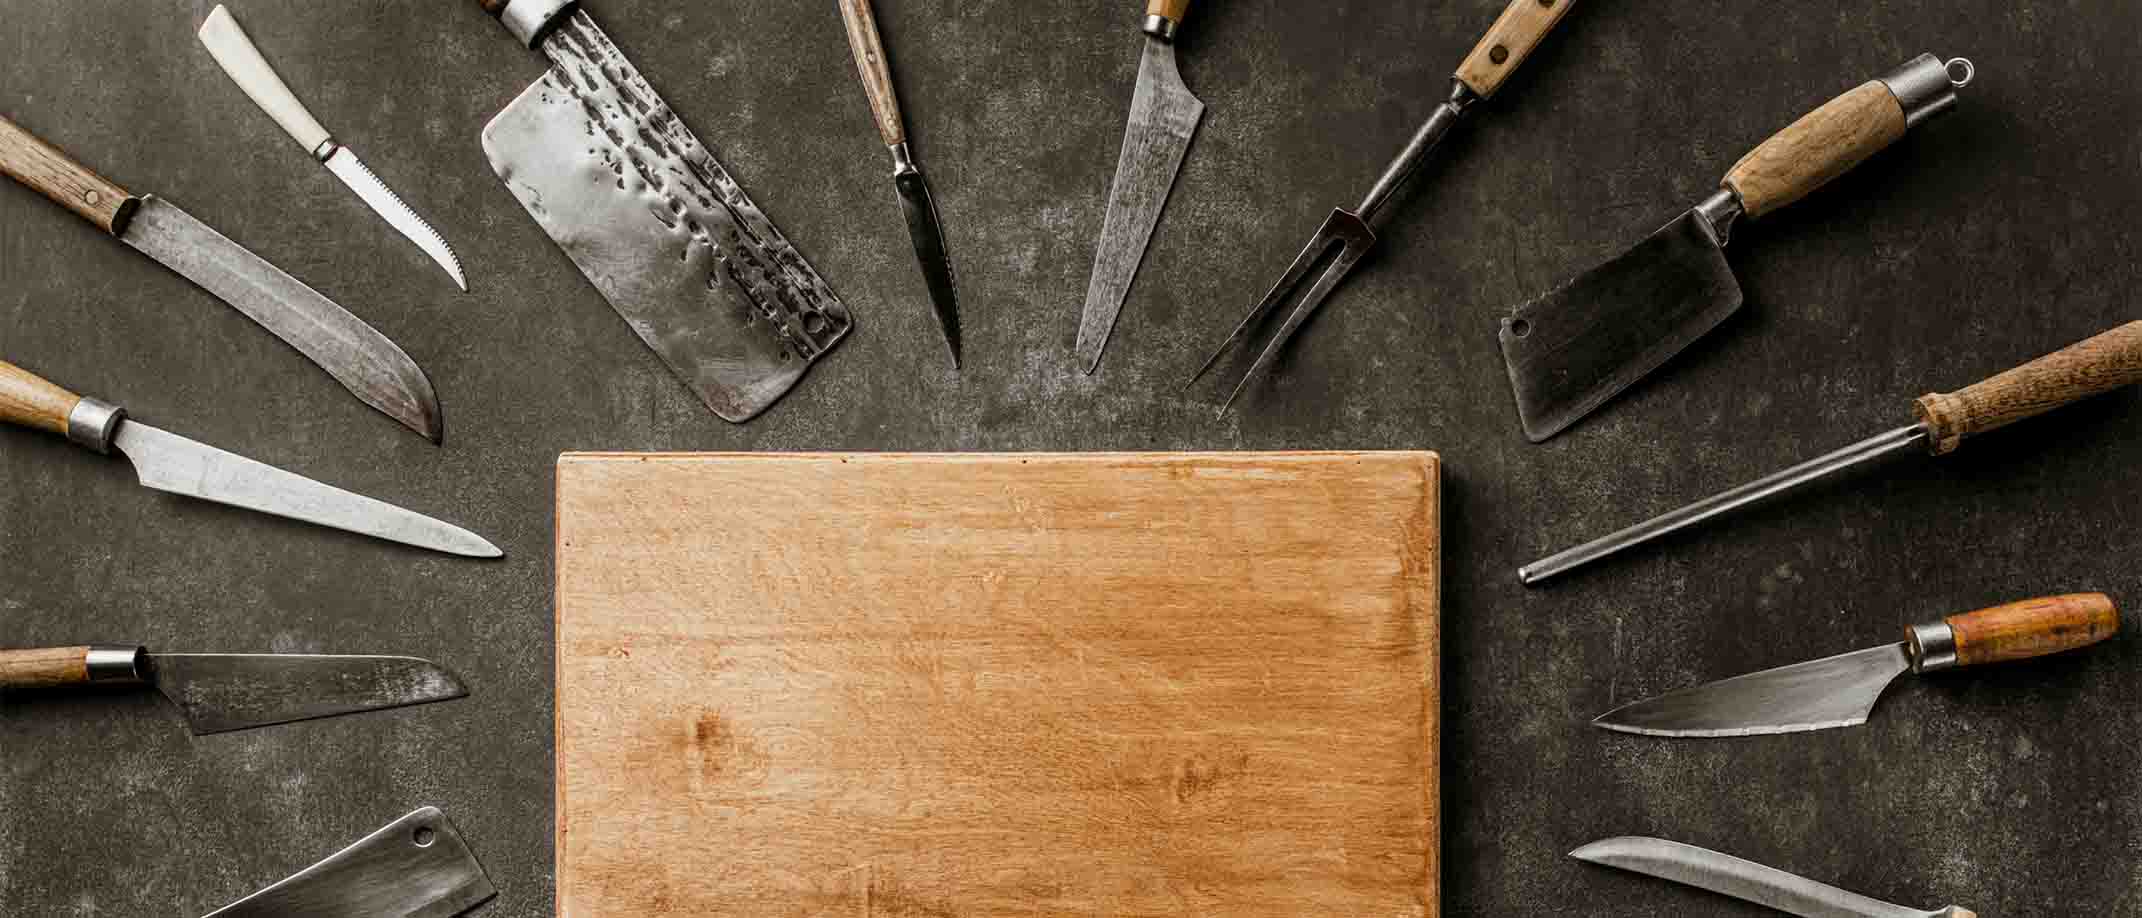 Image of different types on knives and cutting board